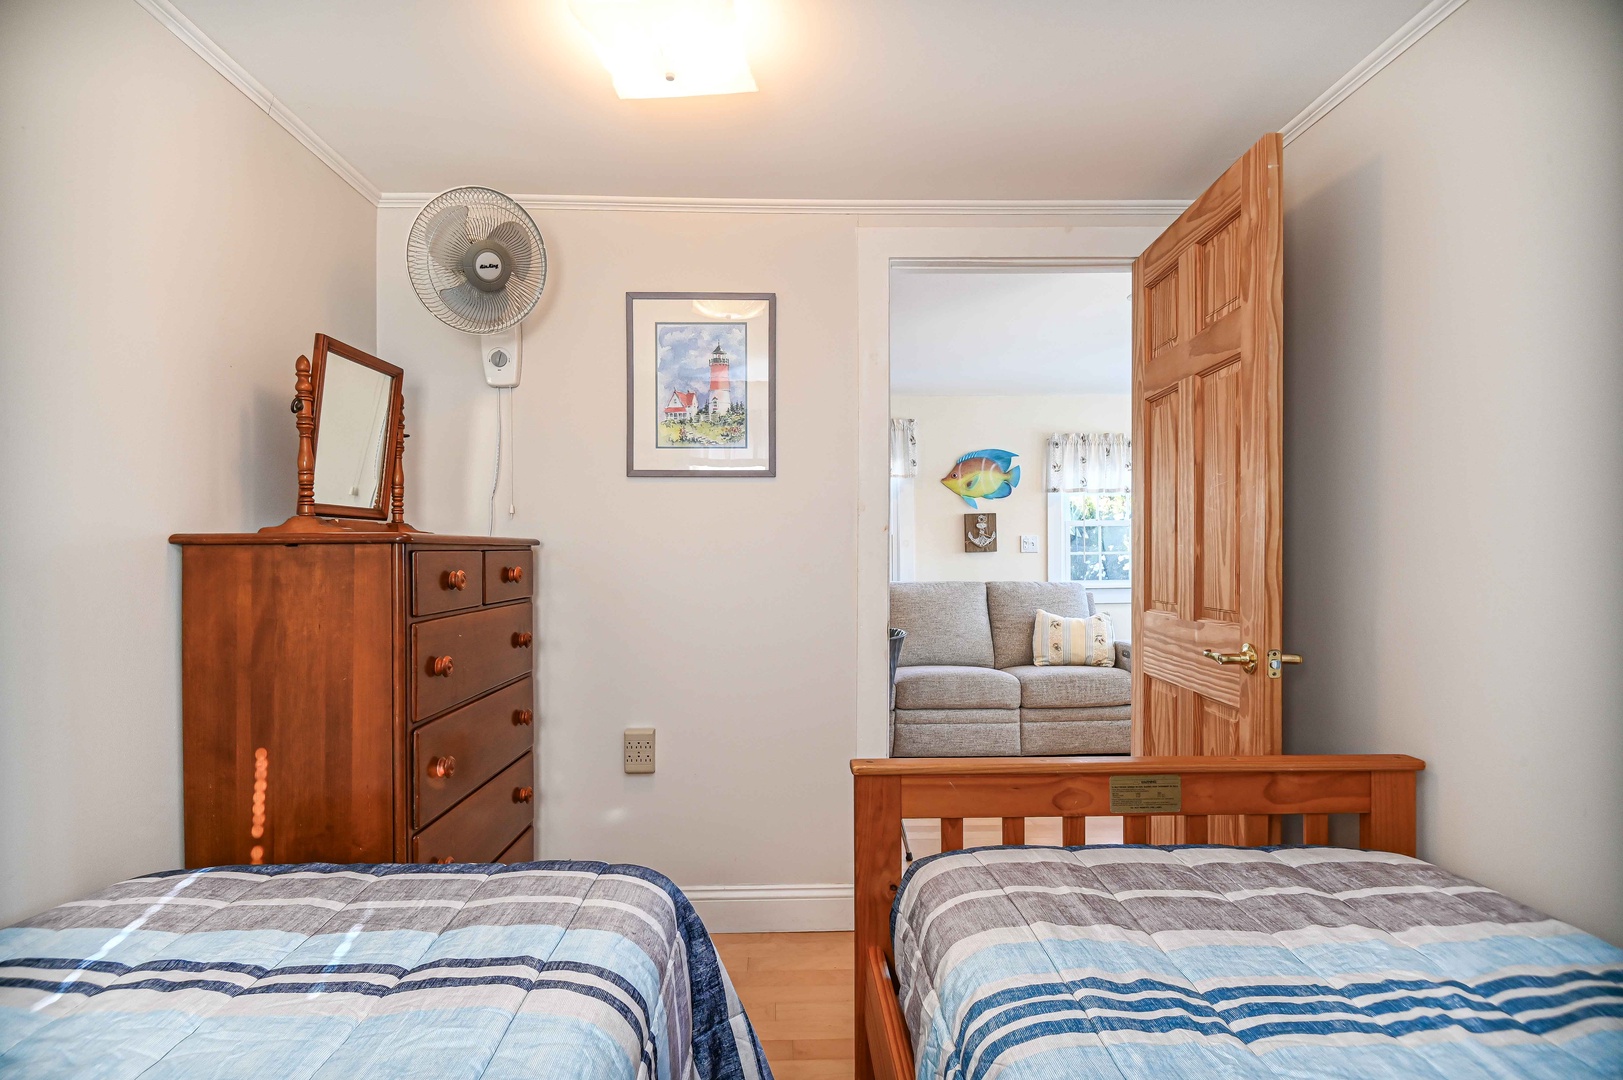 A pair of twin beds & large dresser awaits in the second bedroom